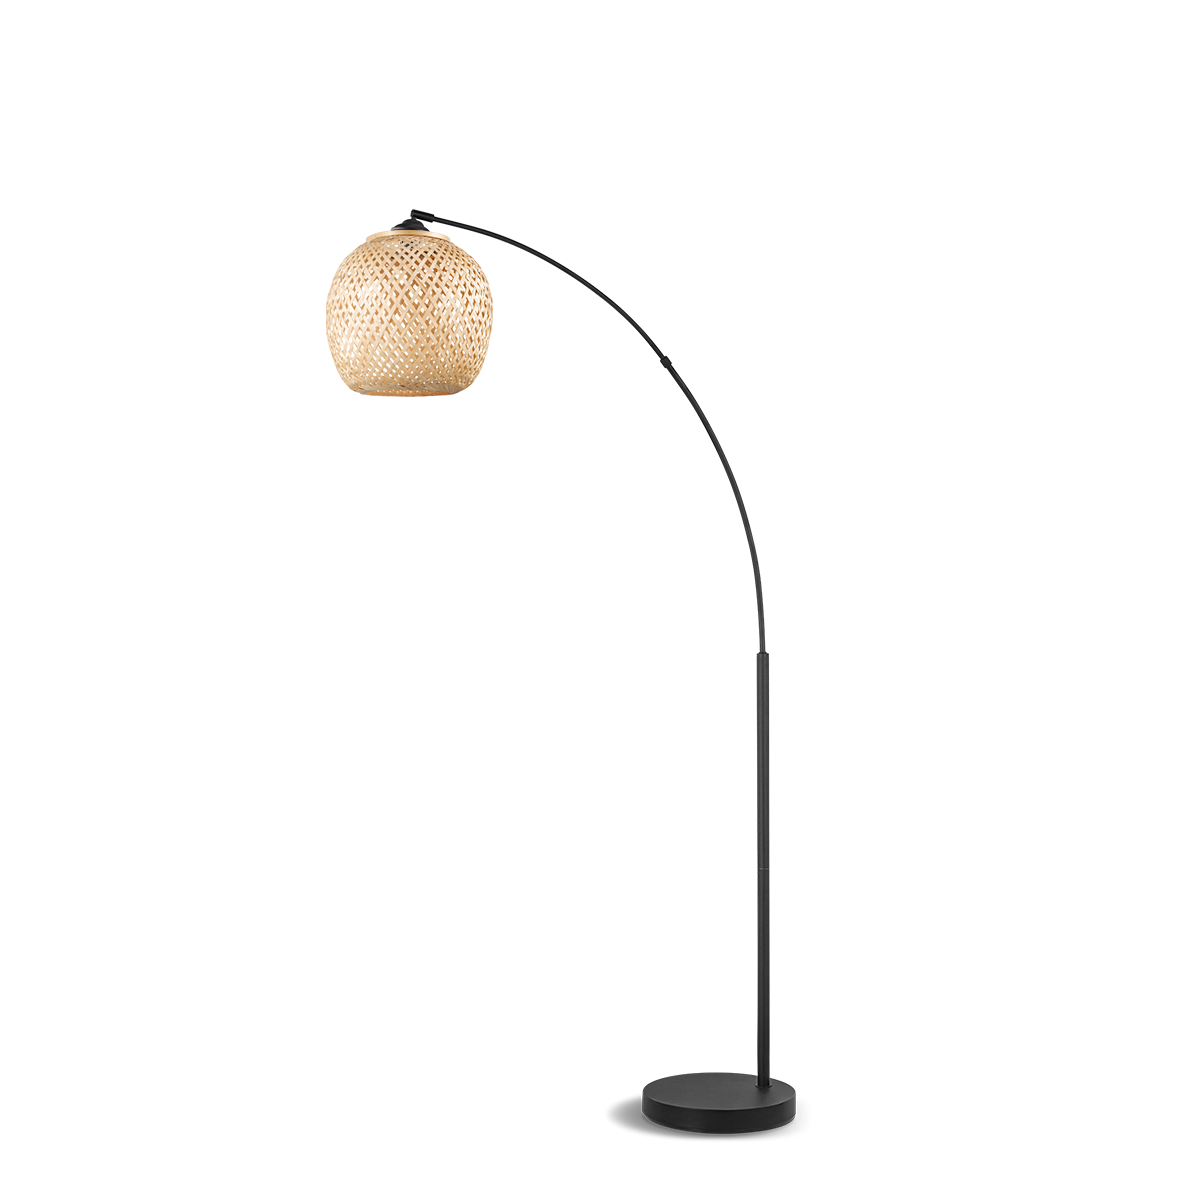 Tangla lighting - TLF7574-01GNT - LED Floor lamp 1 Light - metal and bamboo - natural and black - fischer - E27